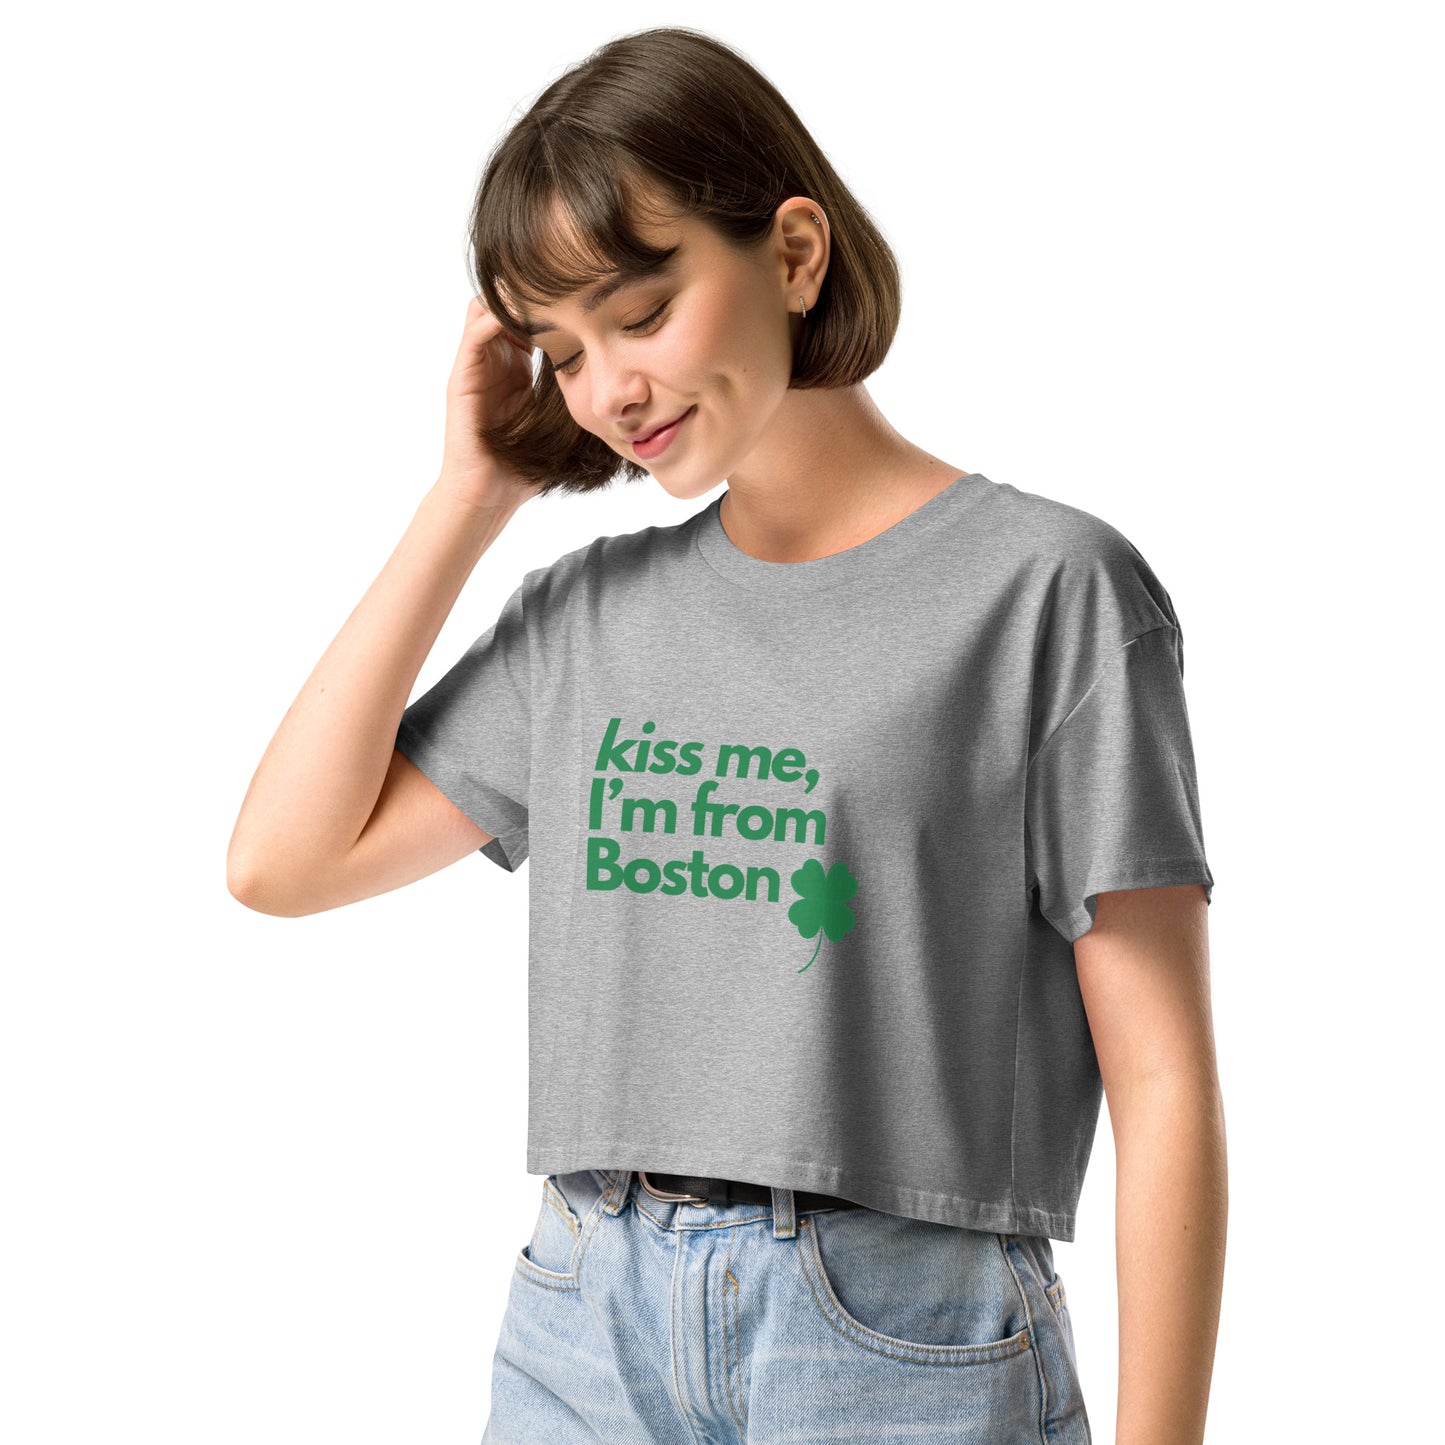 Kiss me, I'm from Boston Women’s crop top